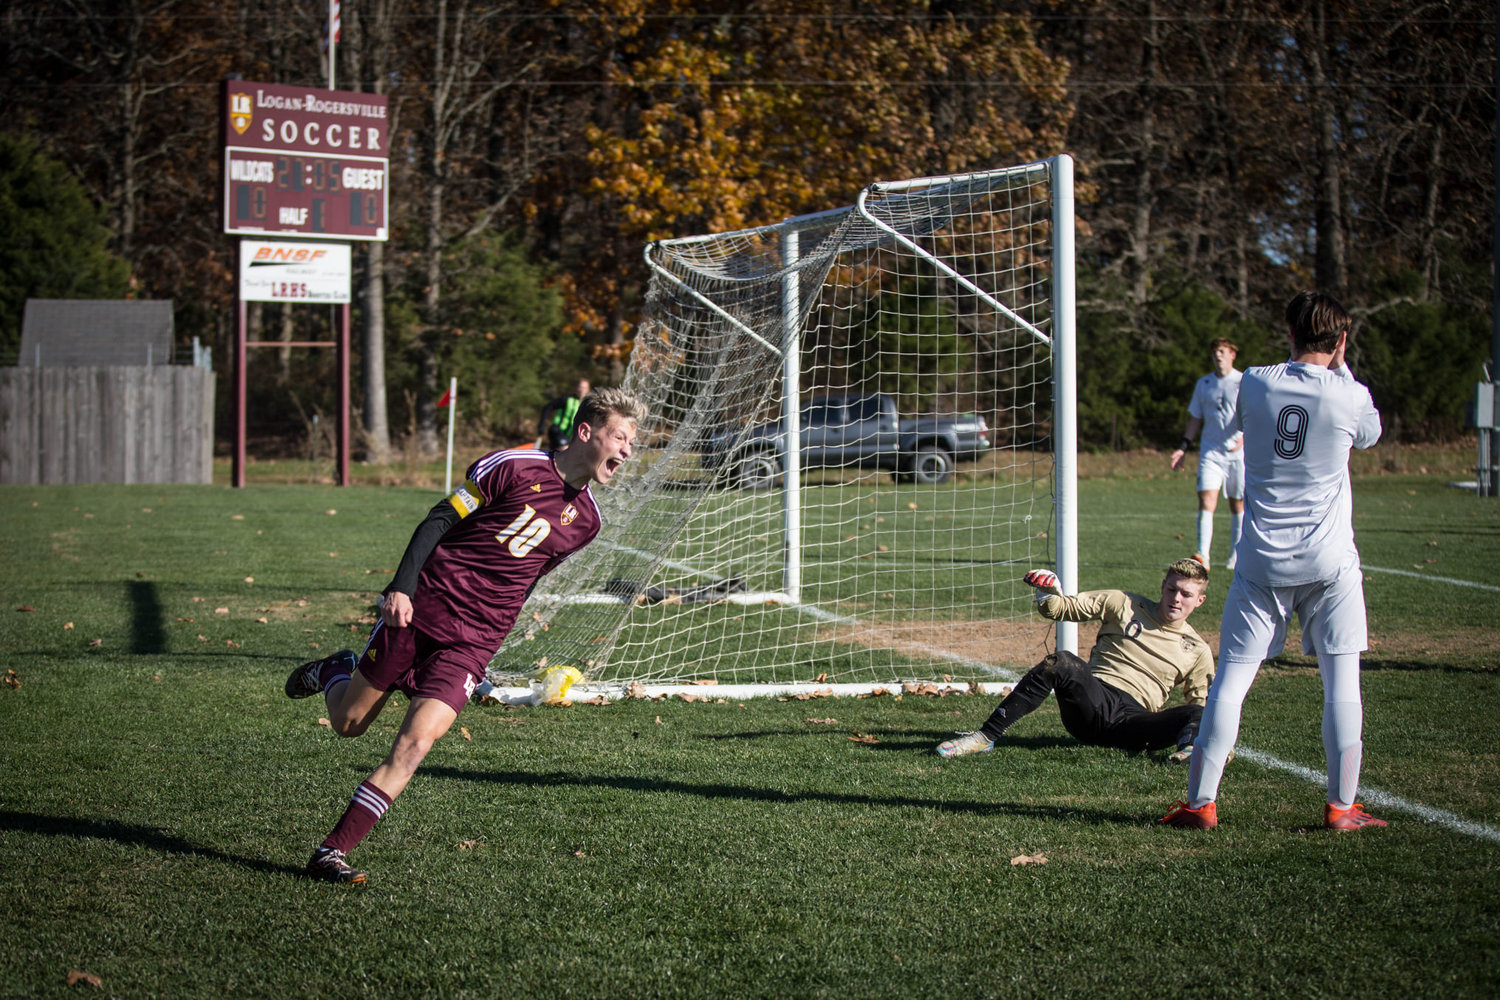 Sage Ballard celebrating Rogersville’s first goal against Excelsior Springs. The goal was made by Sage’s brother Rylen Ballard, shooting from the right side of the field into the top right of the goal. The Ballard brothers finished their senior season as captains.